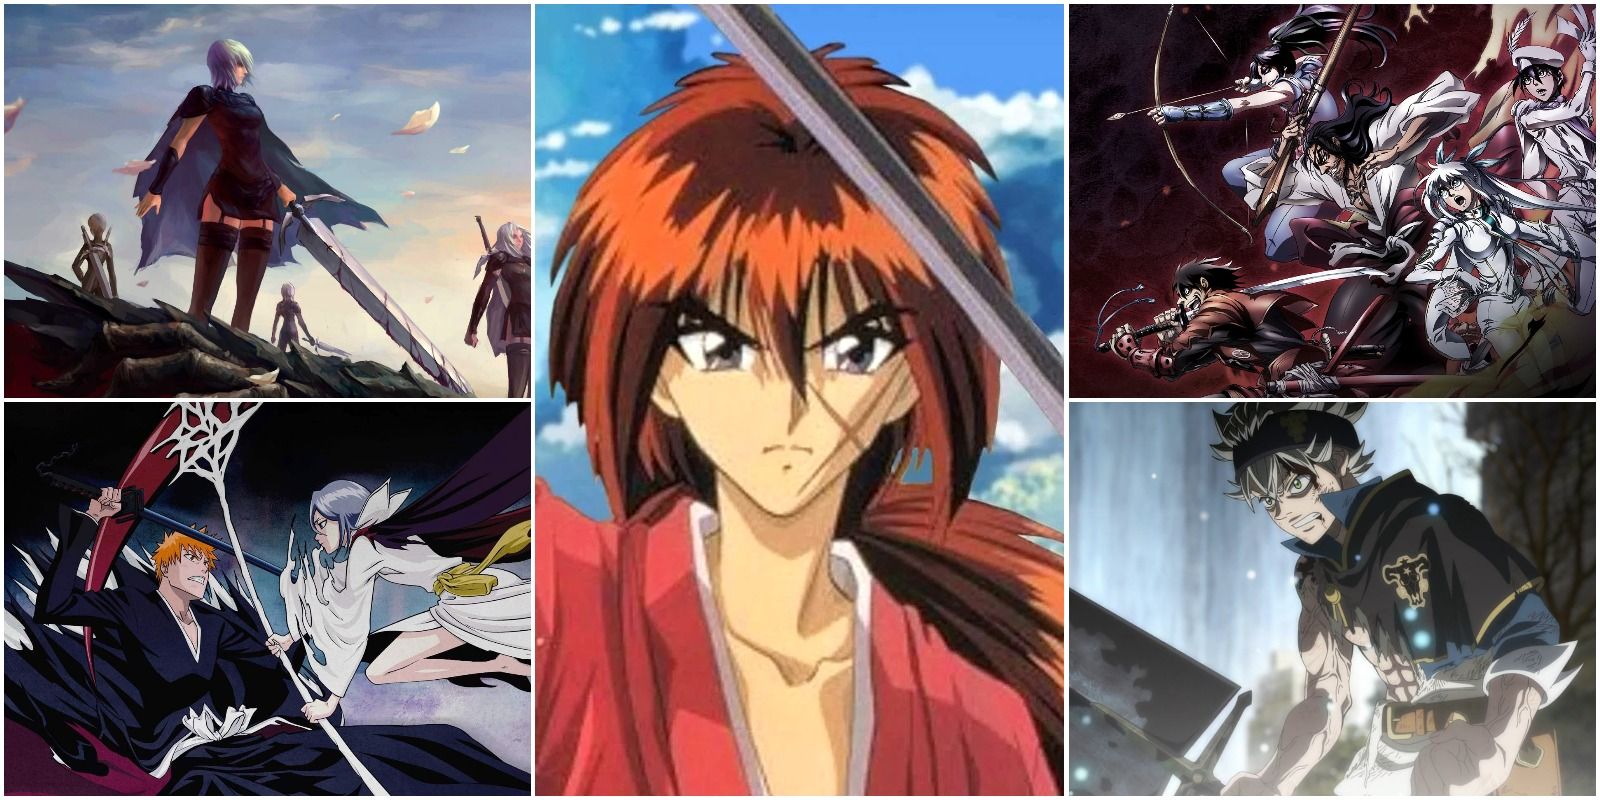 top left: woman with a sword. bottom left: characters fighting in bleach anime. center: red haired samurai. top right: action group shot from drifters anime. bottom right: asta from black clover